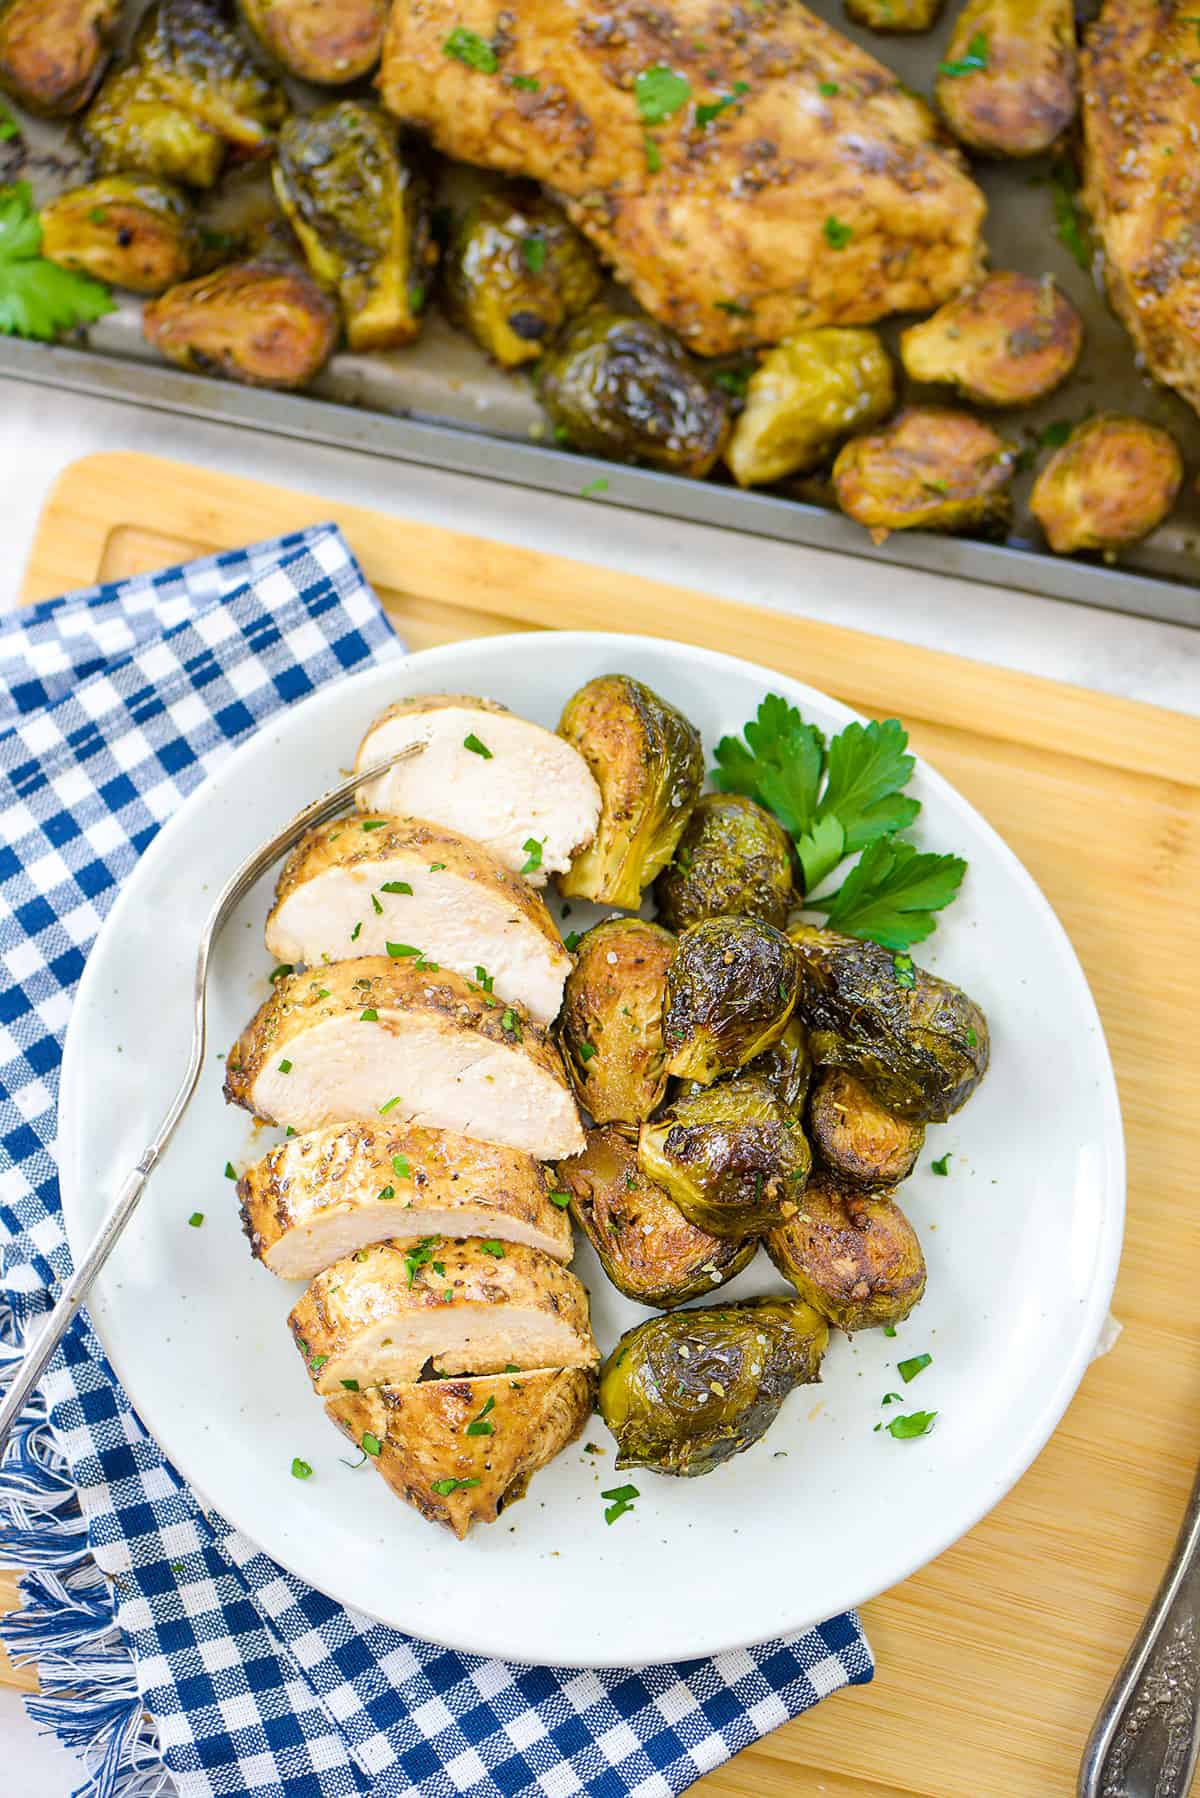 Sliced chicken and roasted Brussels sprouts on white plate.